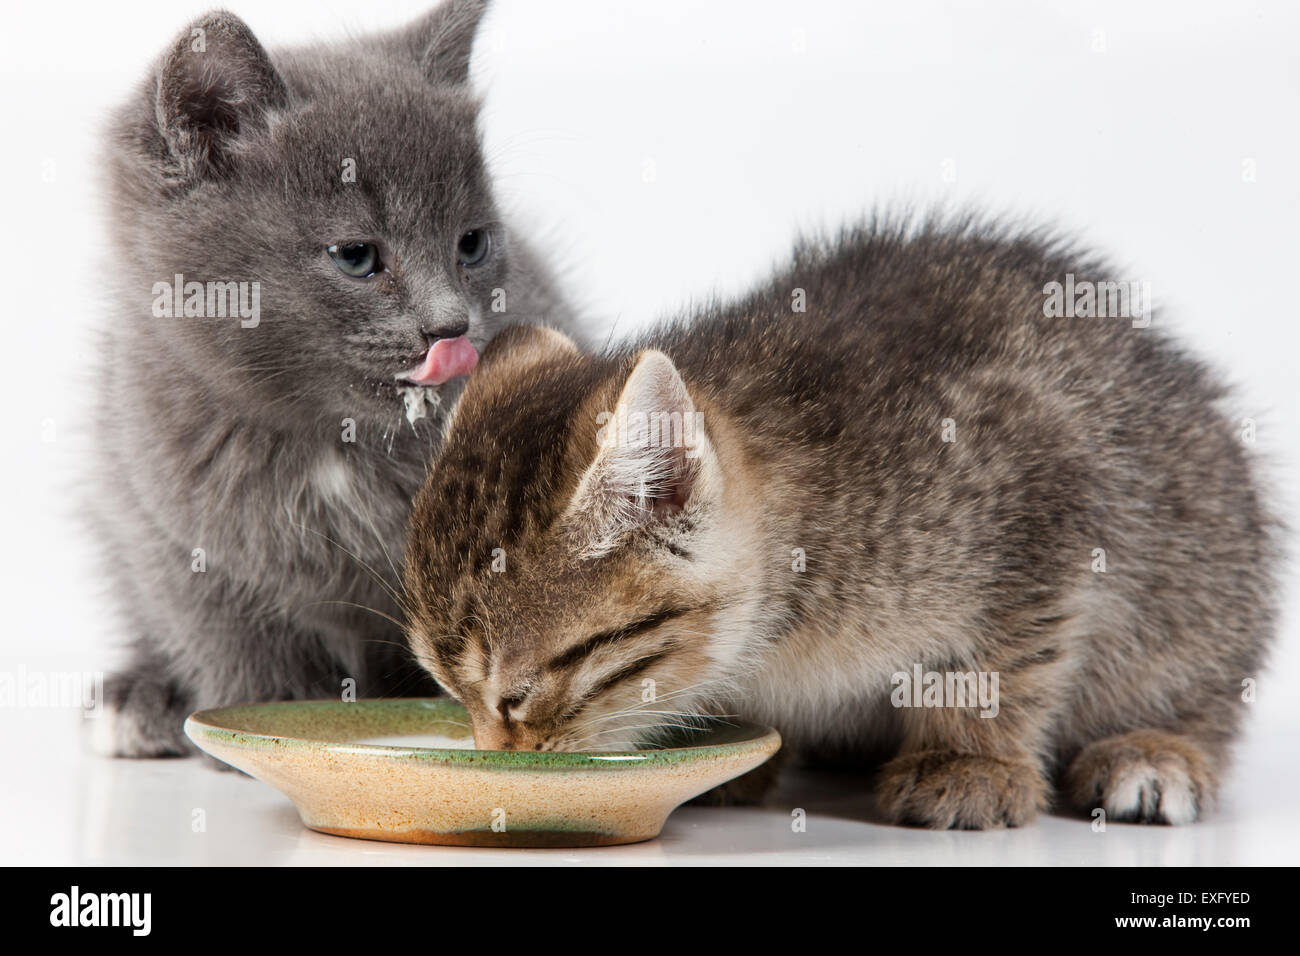 kitten domestic cat animal cute pets feline isolated white young fur background paw looking whisker on animals sitting nature Stock Photo